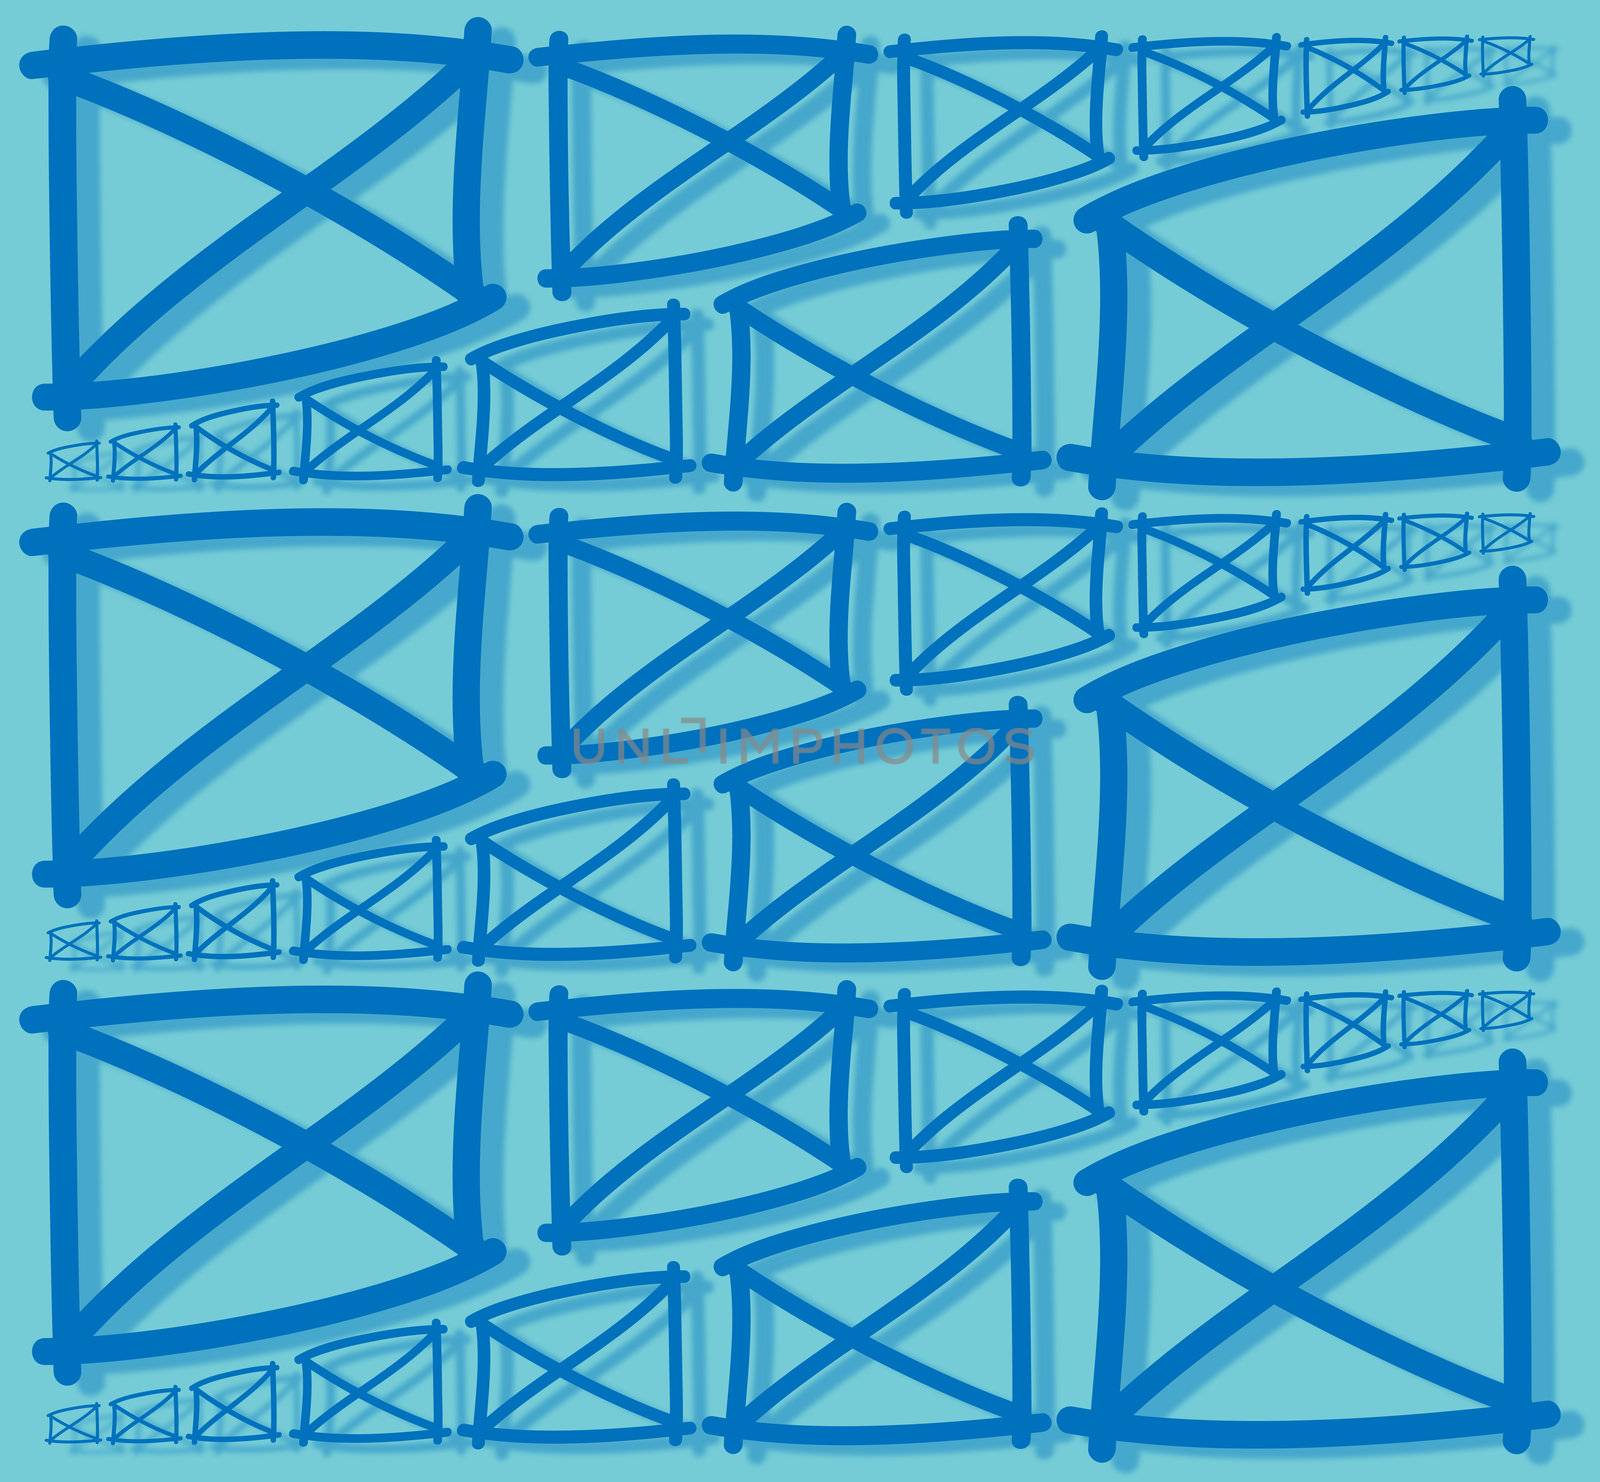 background or texture fence parts blue distributed evenly by